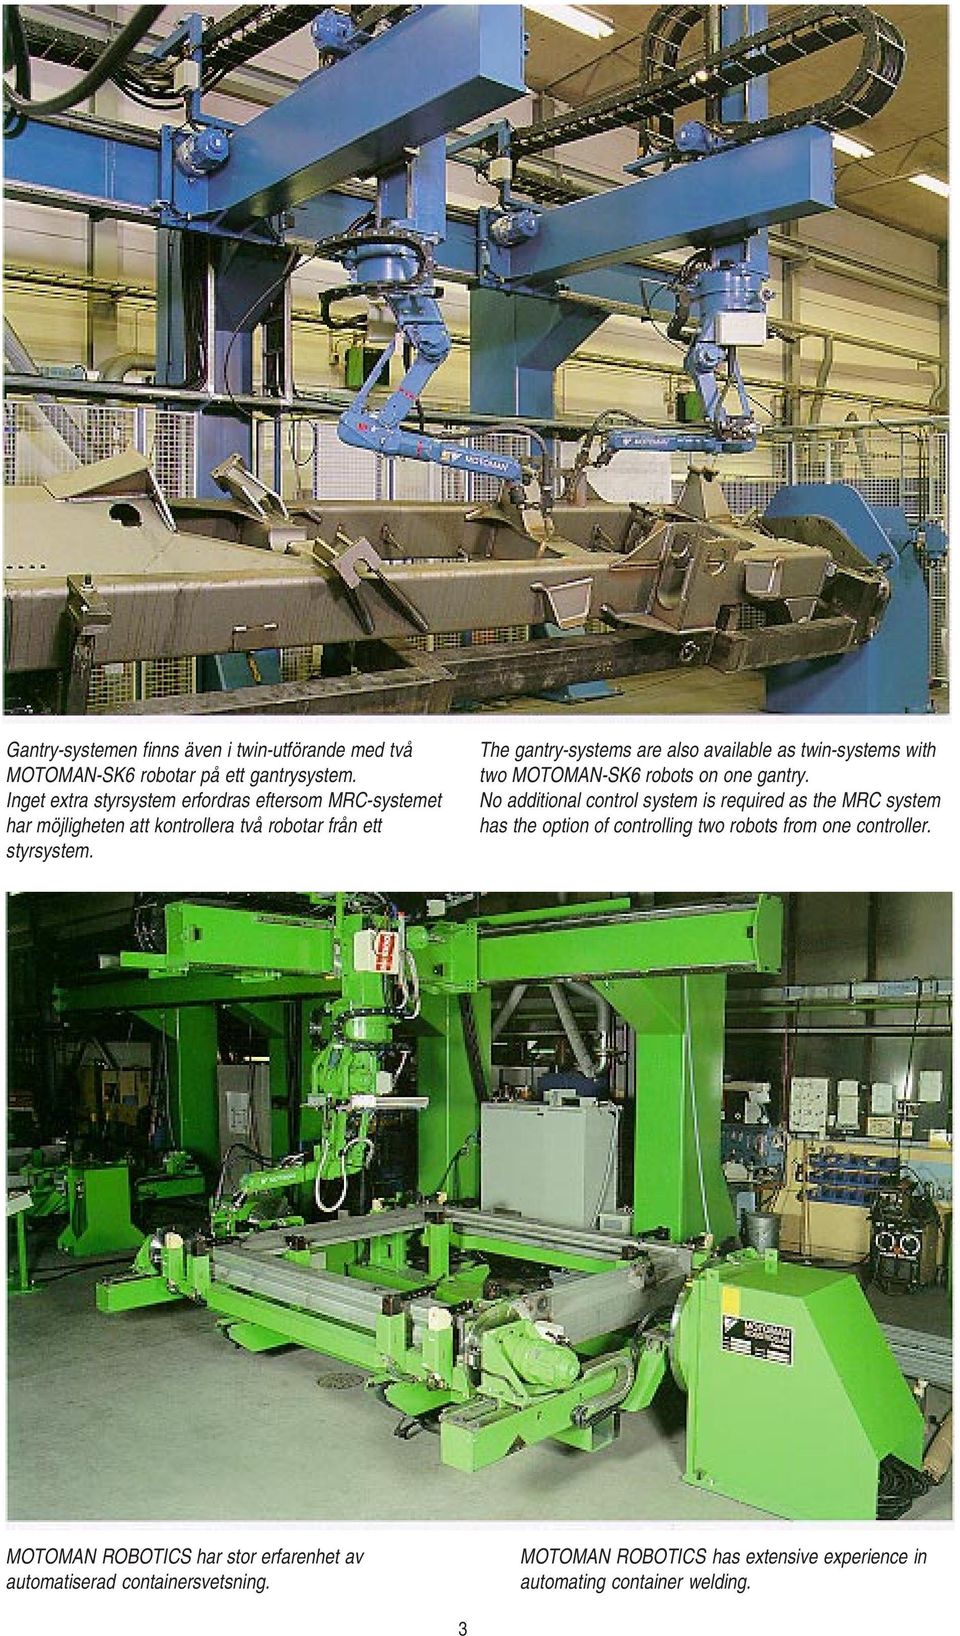 The gantry-systems are also available as twin-systems with two MOTOMAN-SK6 robots on one gantry.